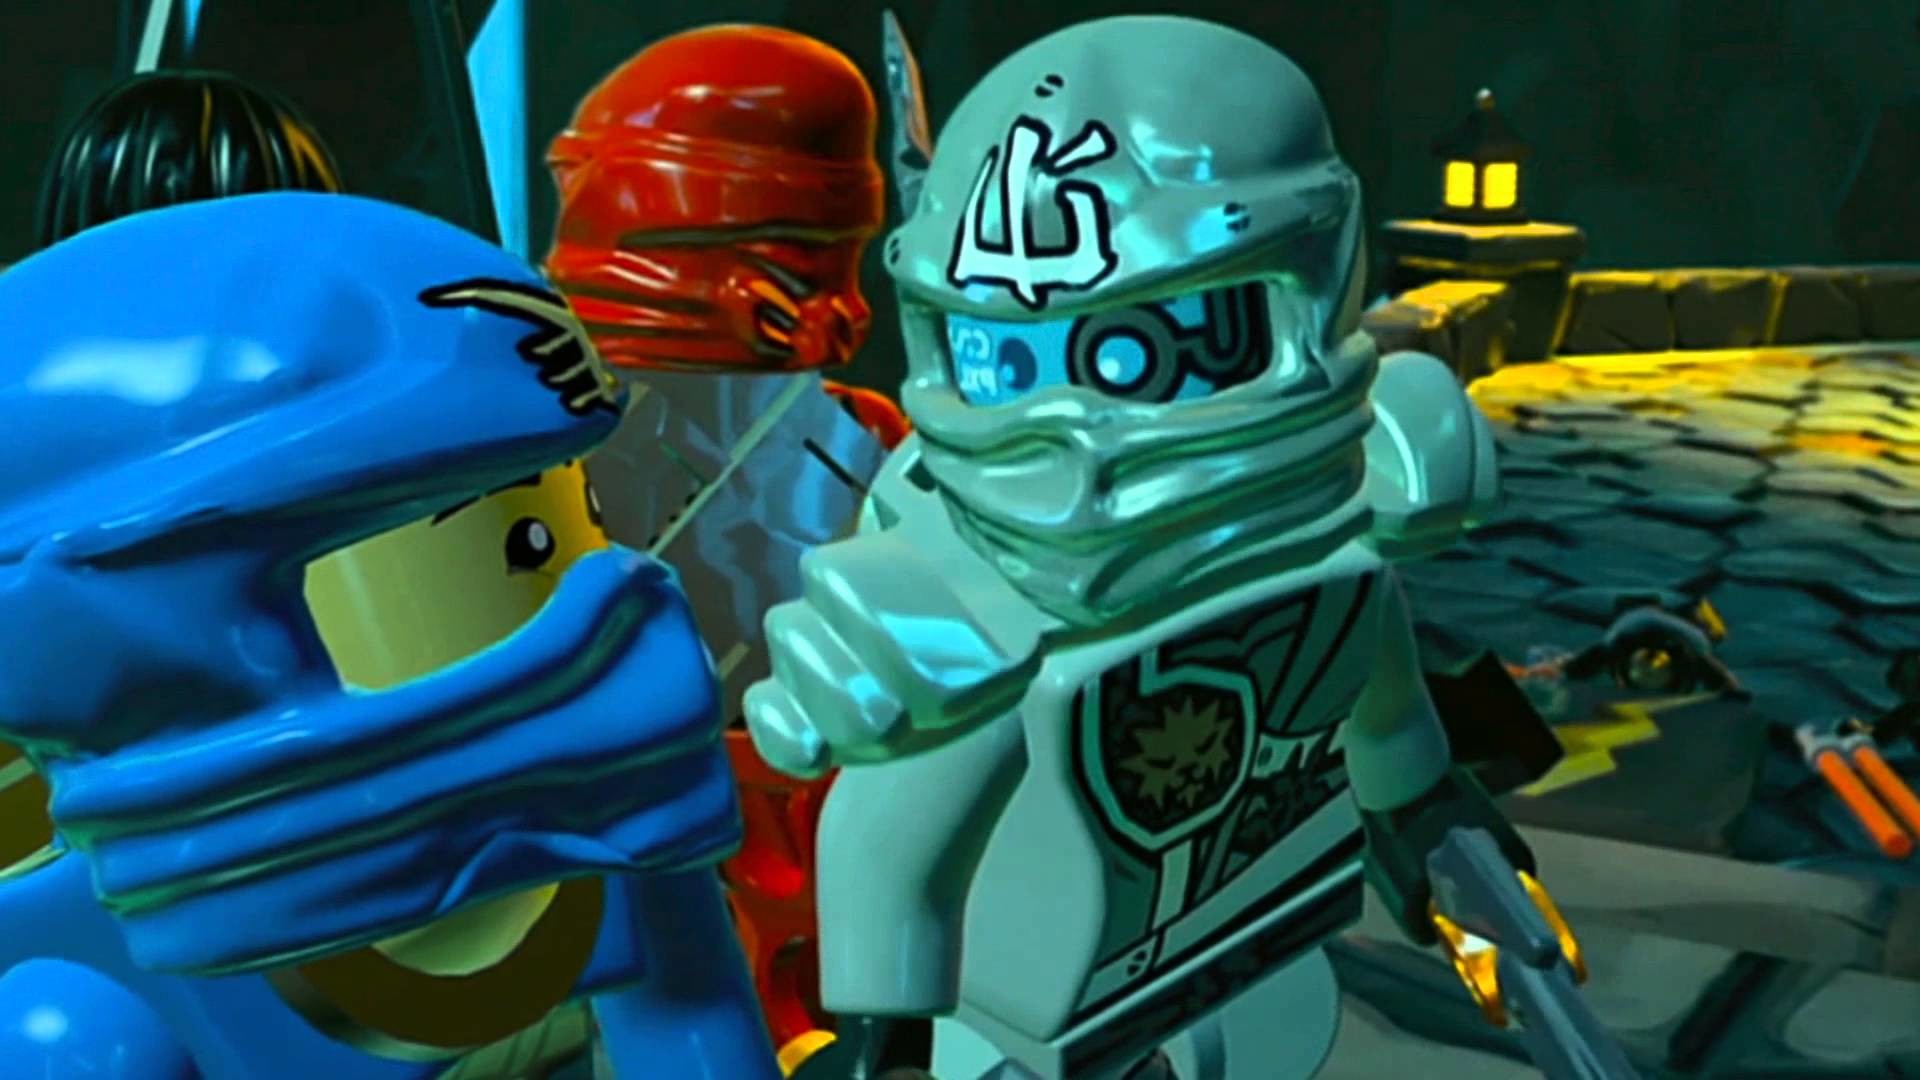 LEGO NINJAGO SHADOW OF RONIN NOW AVAILABLE ON iPHONE, iPAD and iPOD TOUCH